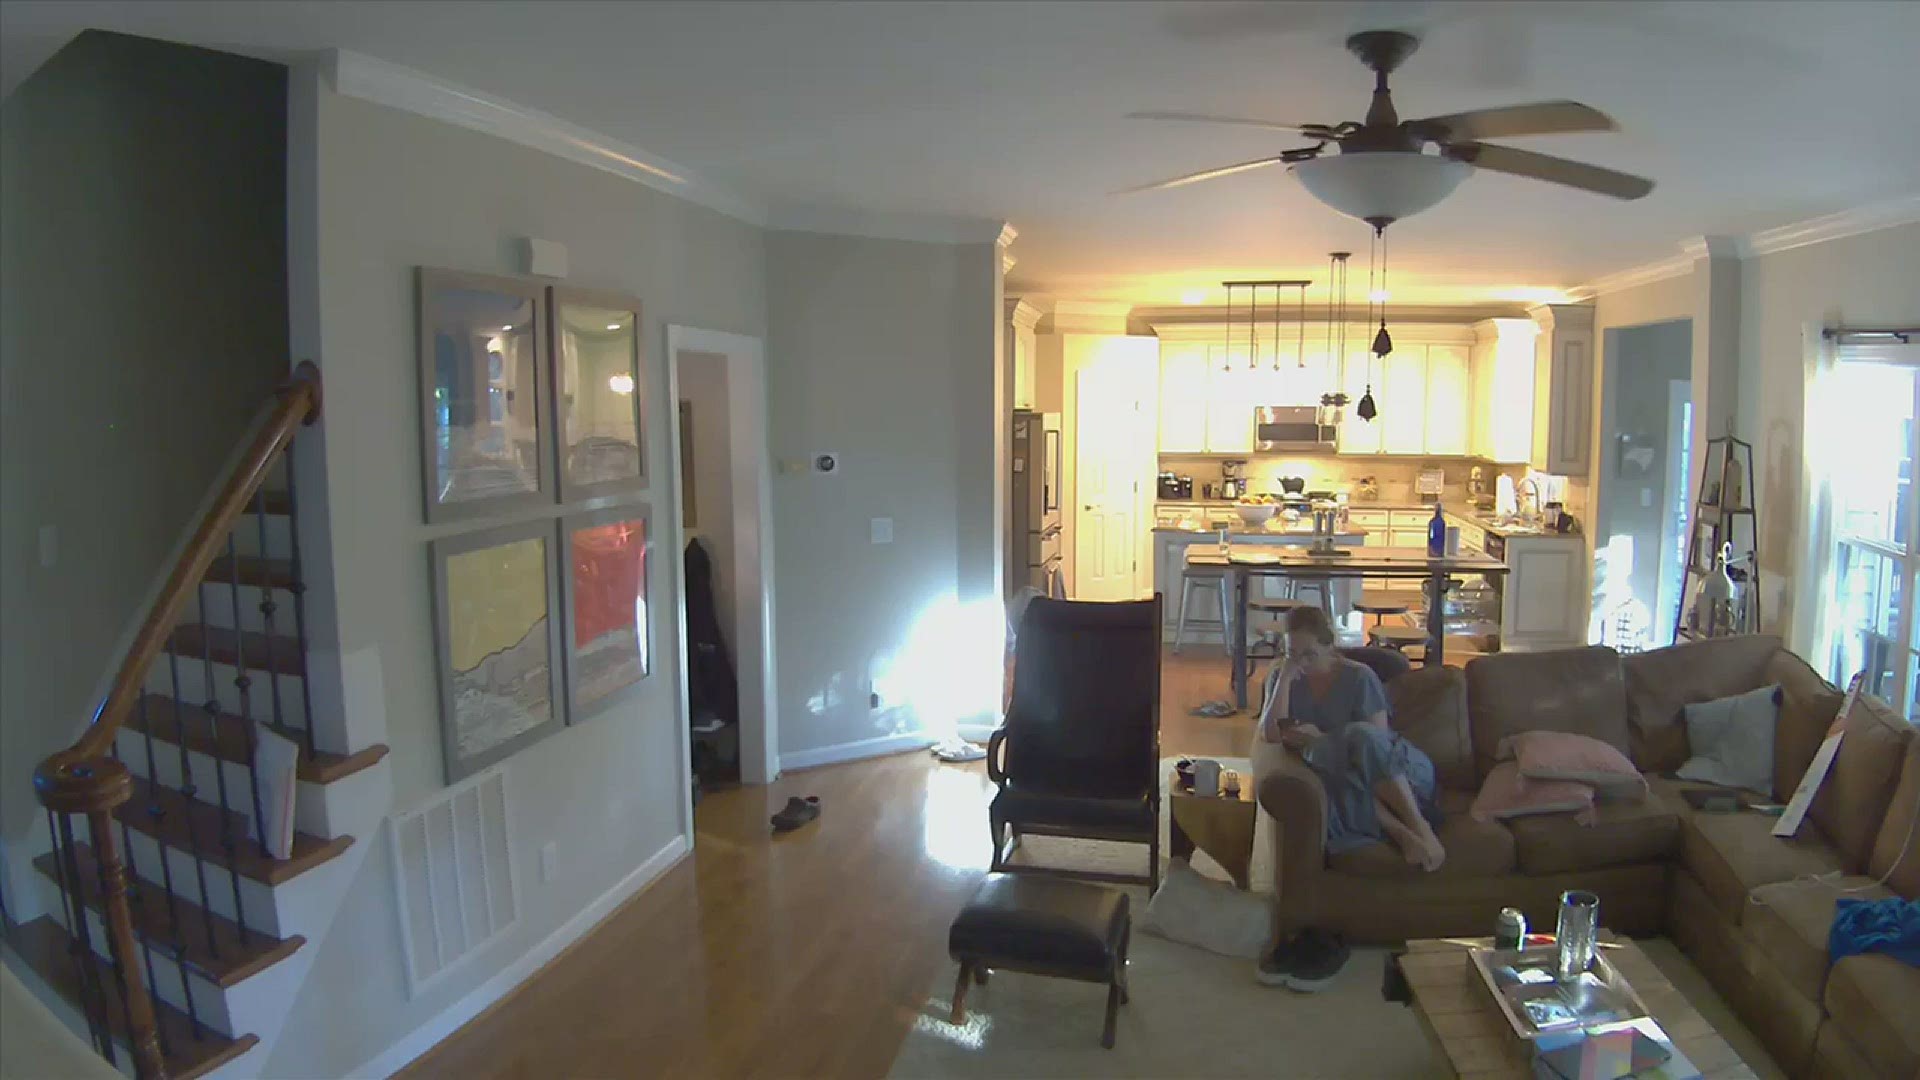 Paige Flotkoetter shares video from her home in Huntersville during Sunday's earthquake.